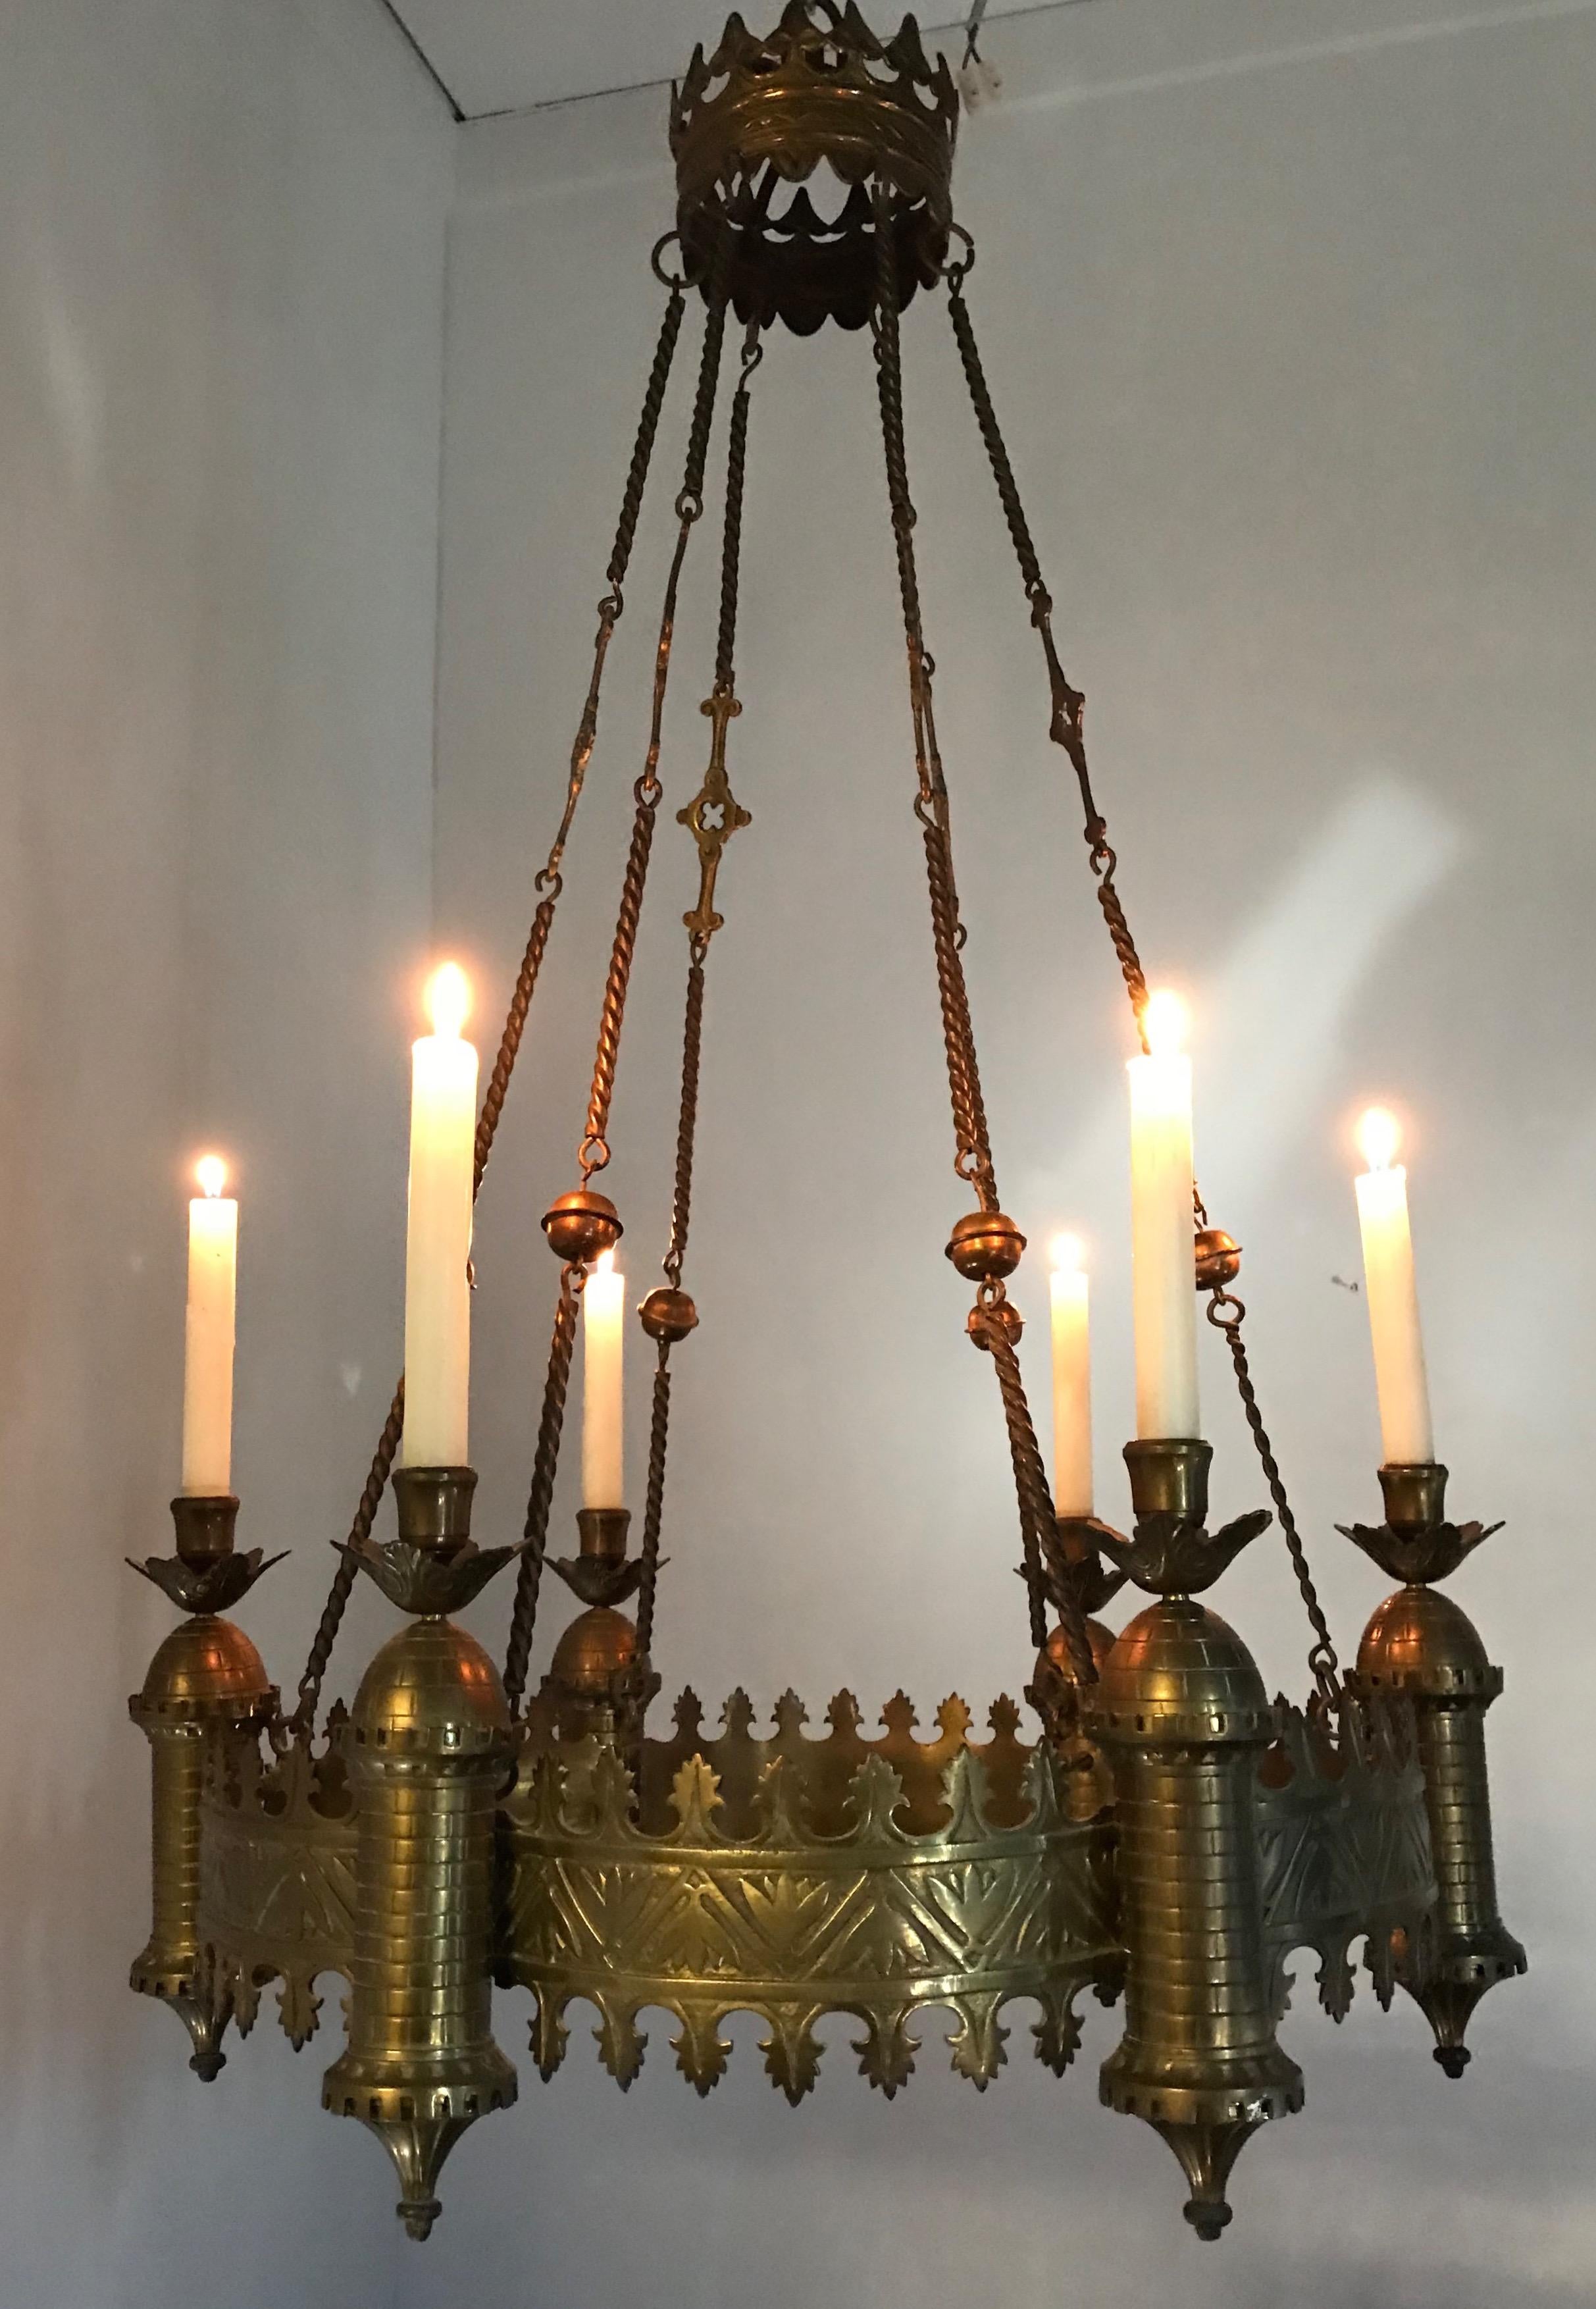 Antique Bronze and Brass Castle Tower Design Gothic Revival Candle Chandelier 6